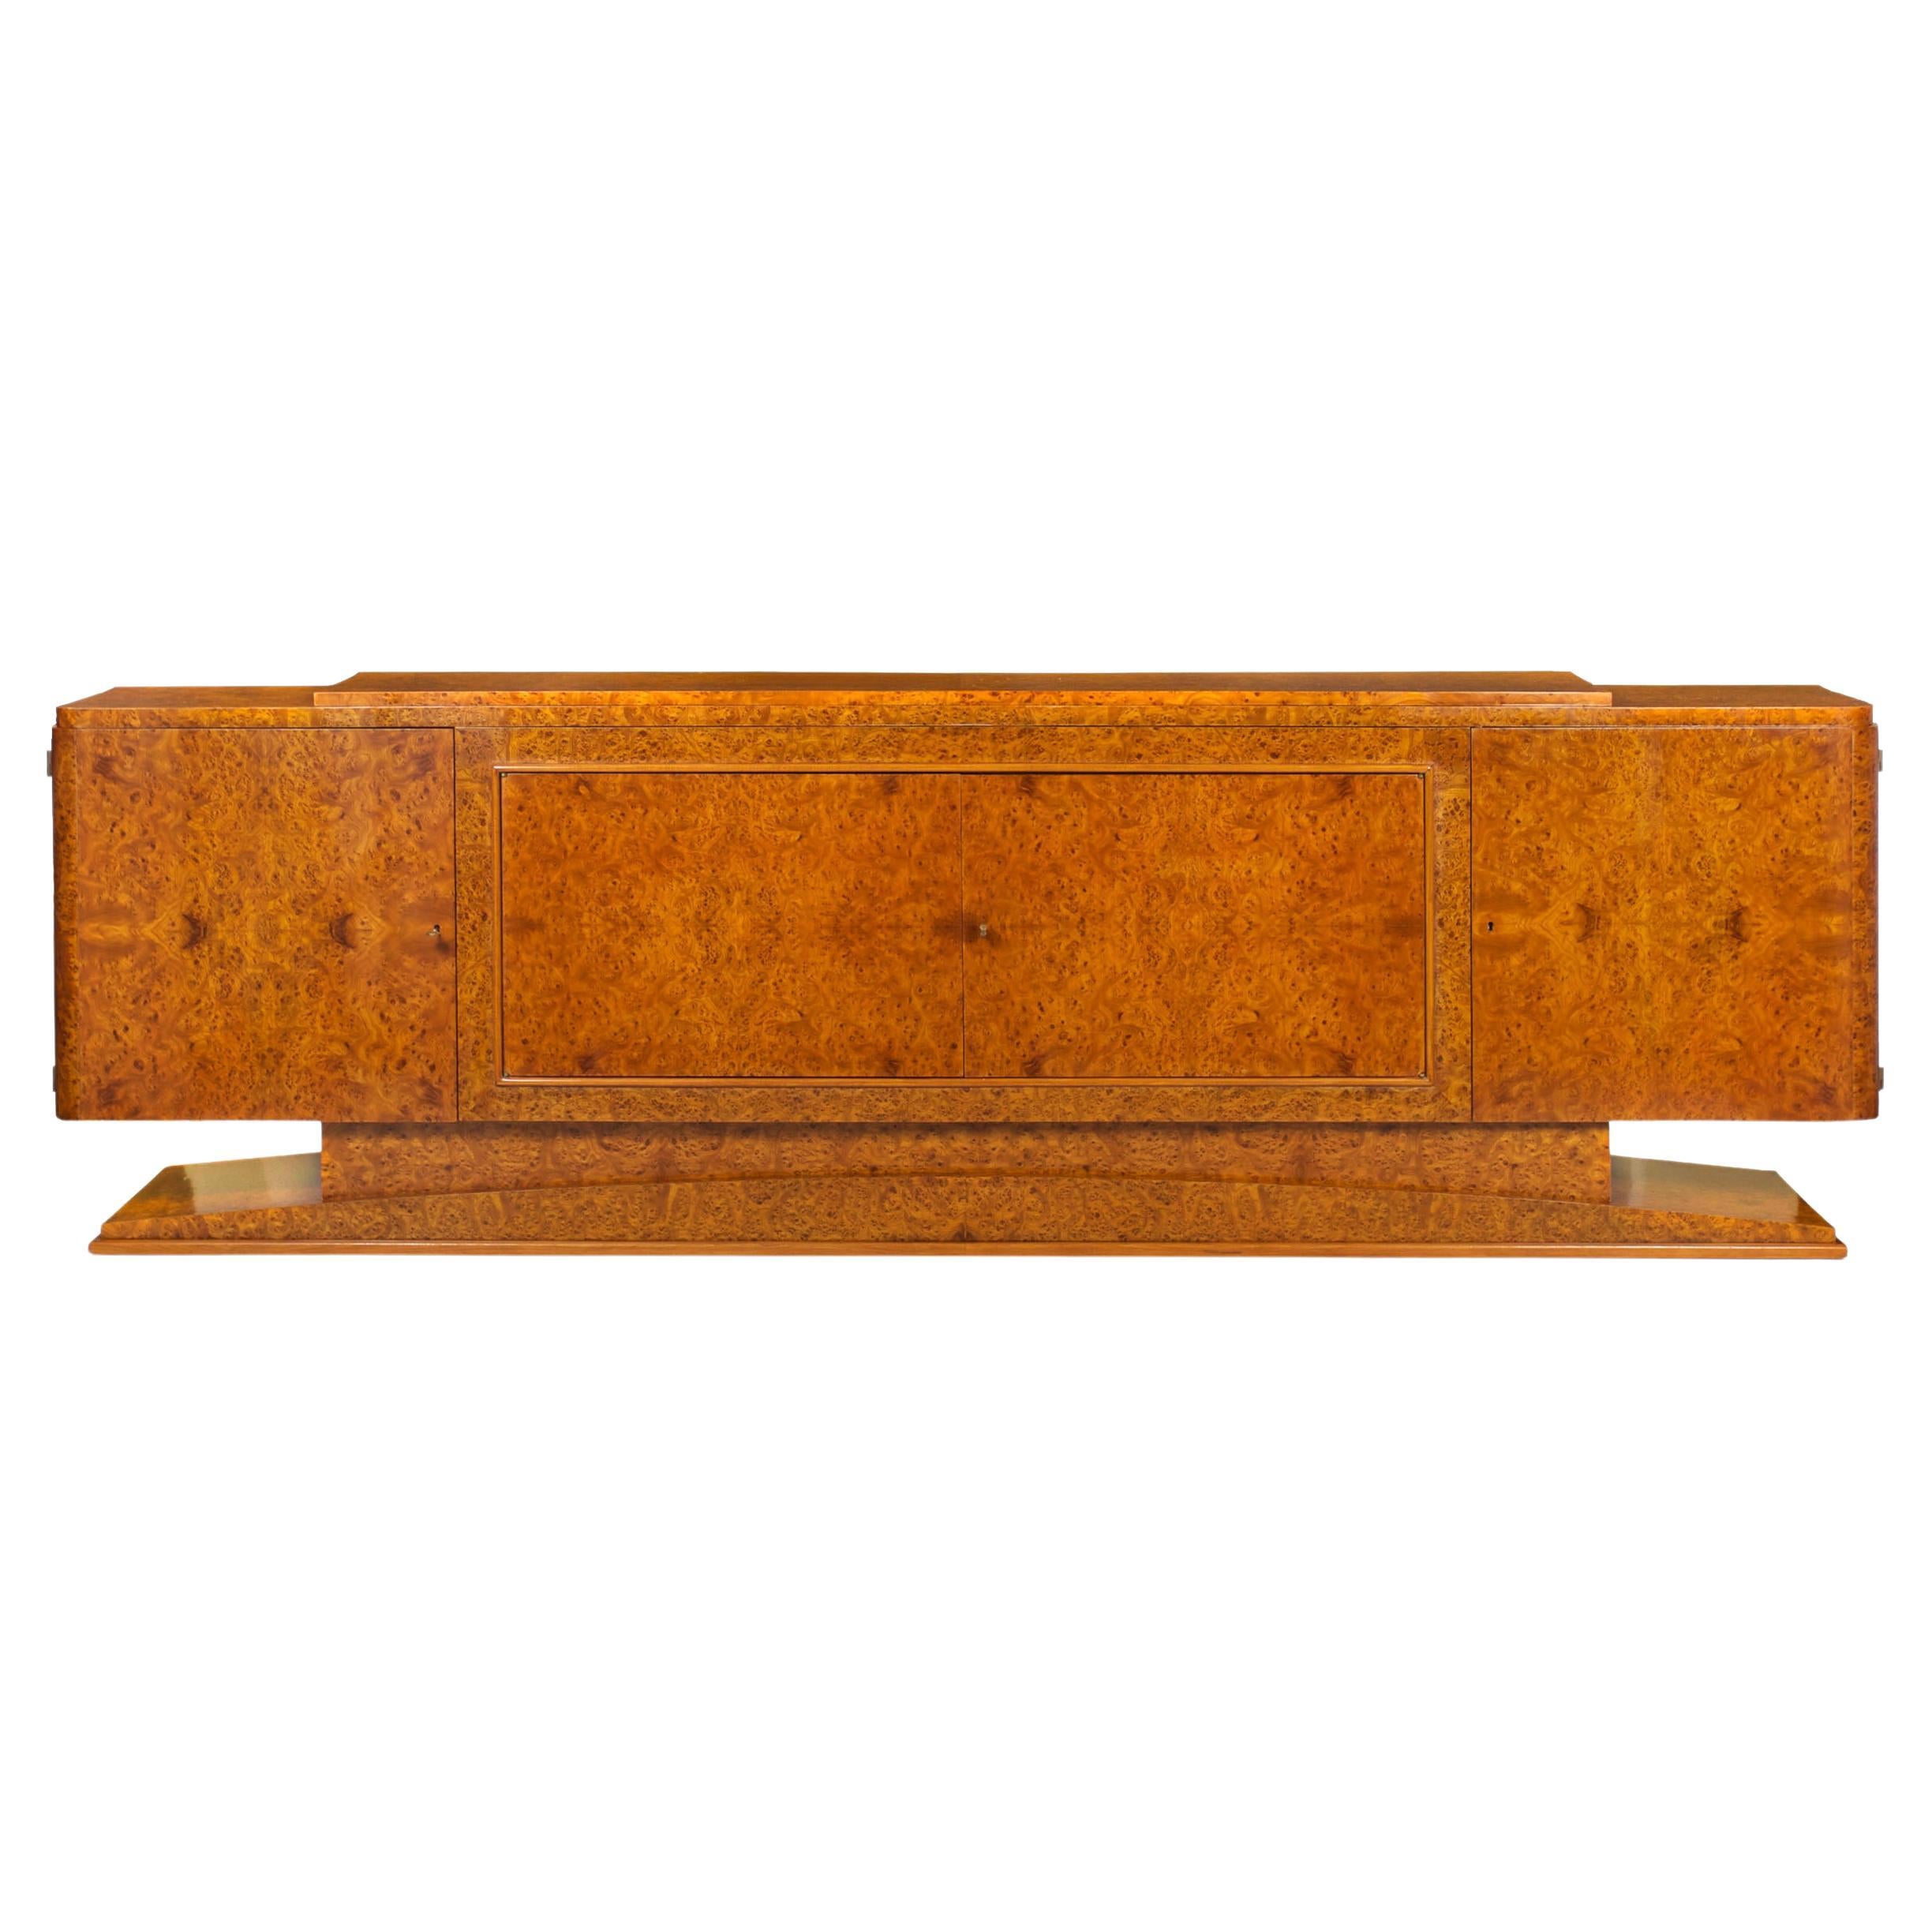 Circa 1930s French Art Deco Burl Olivewood Credenza Cabinet, 118" wide For Sale